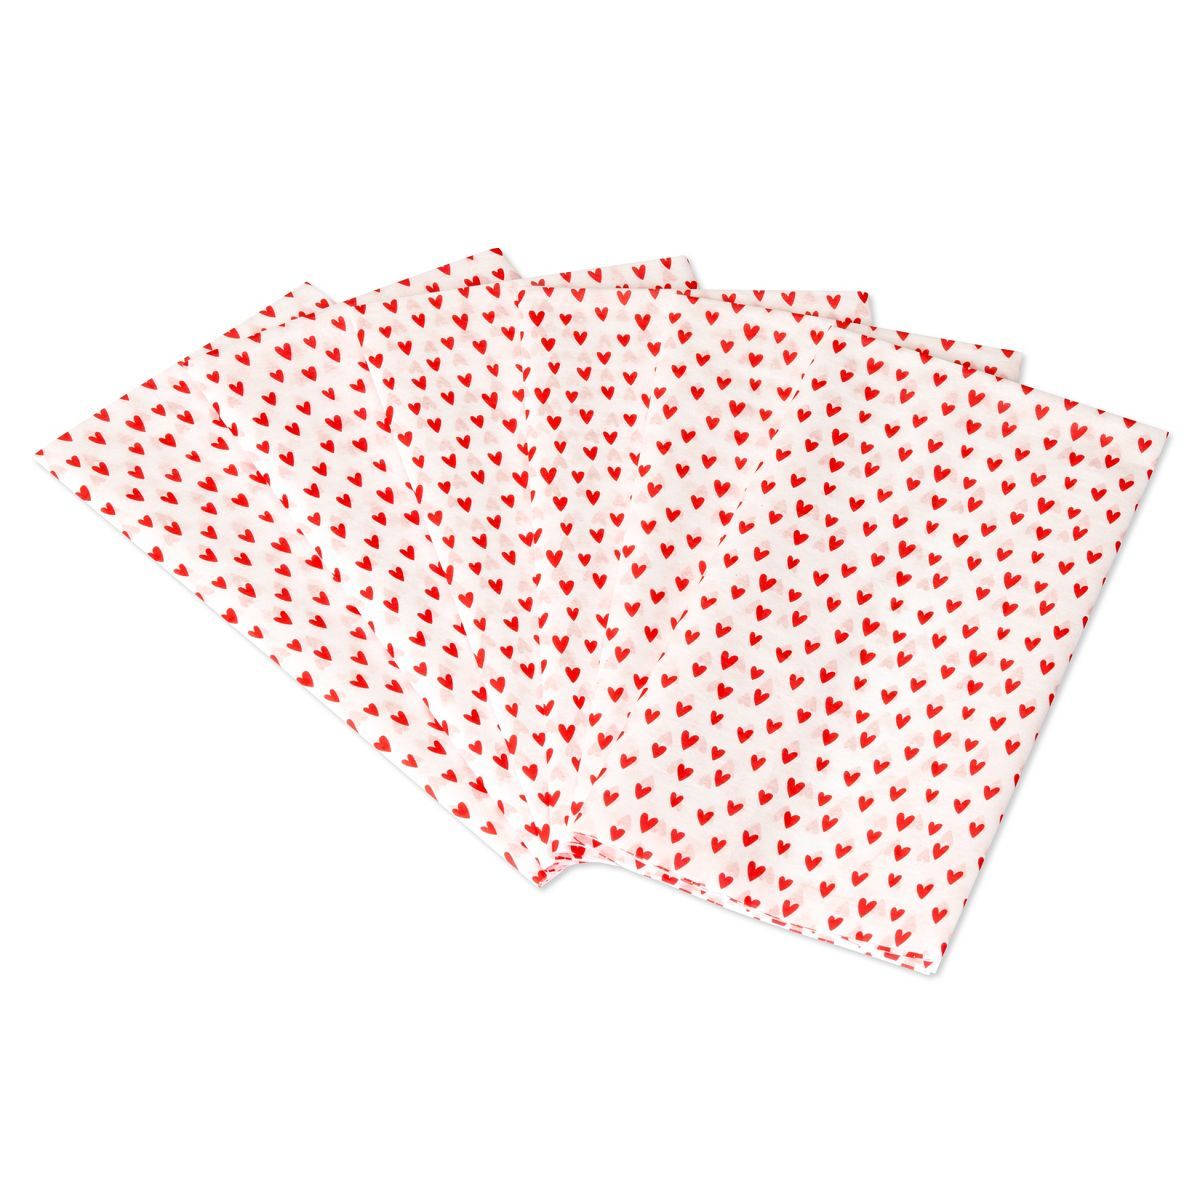 6 Sheet Red Hearts on White Tissue Paper | Target